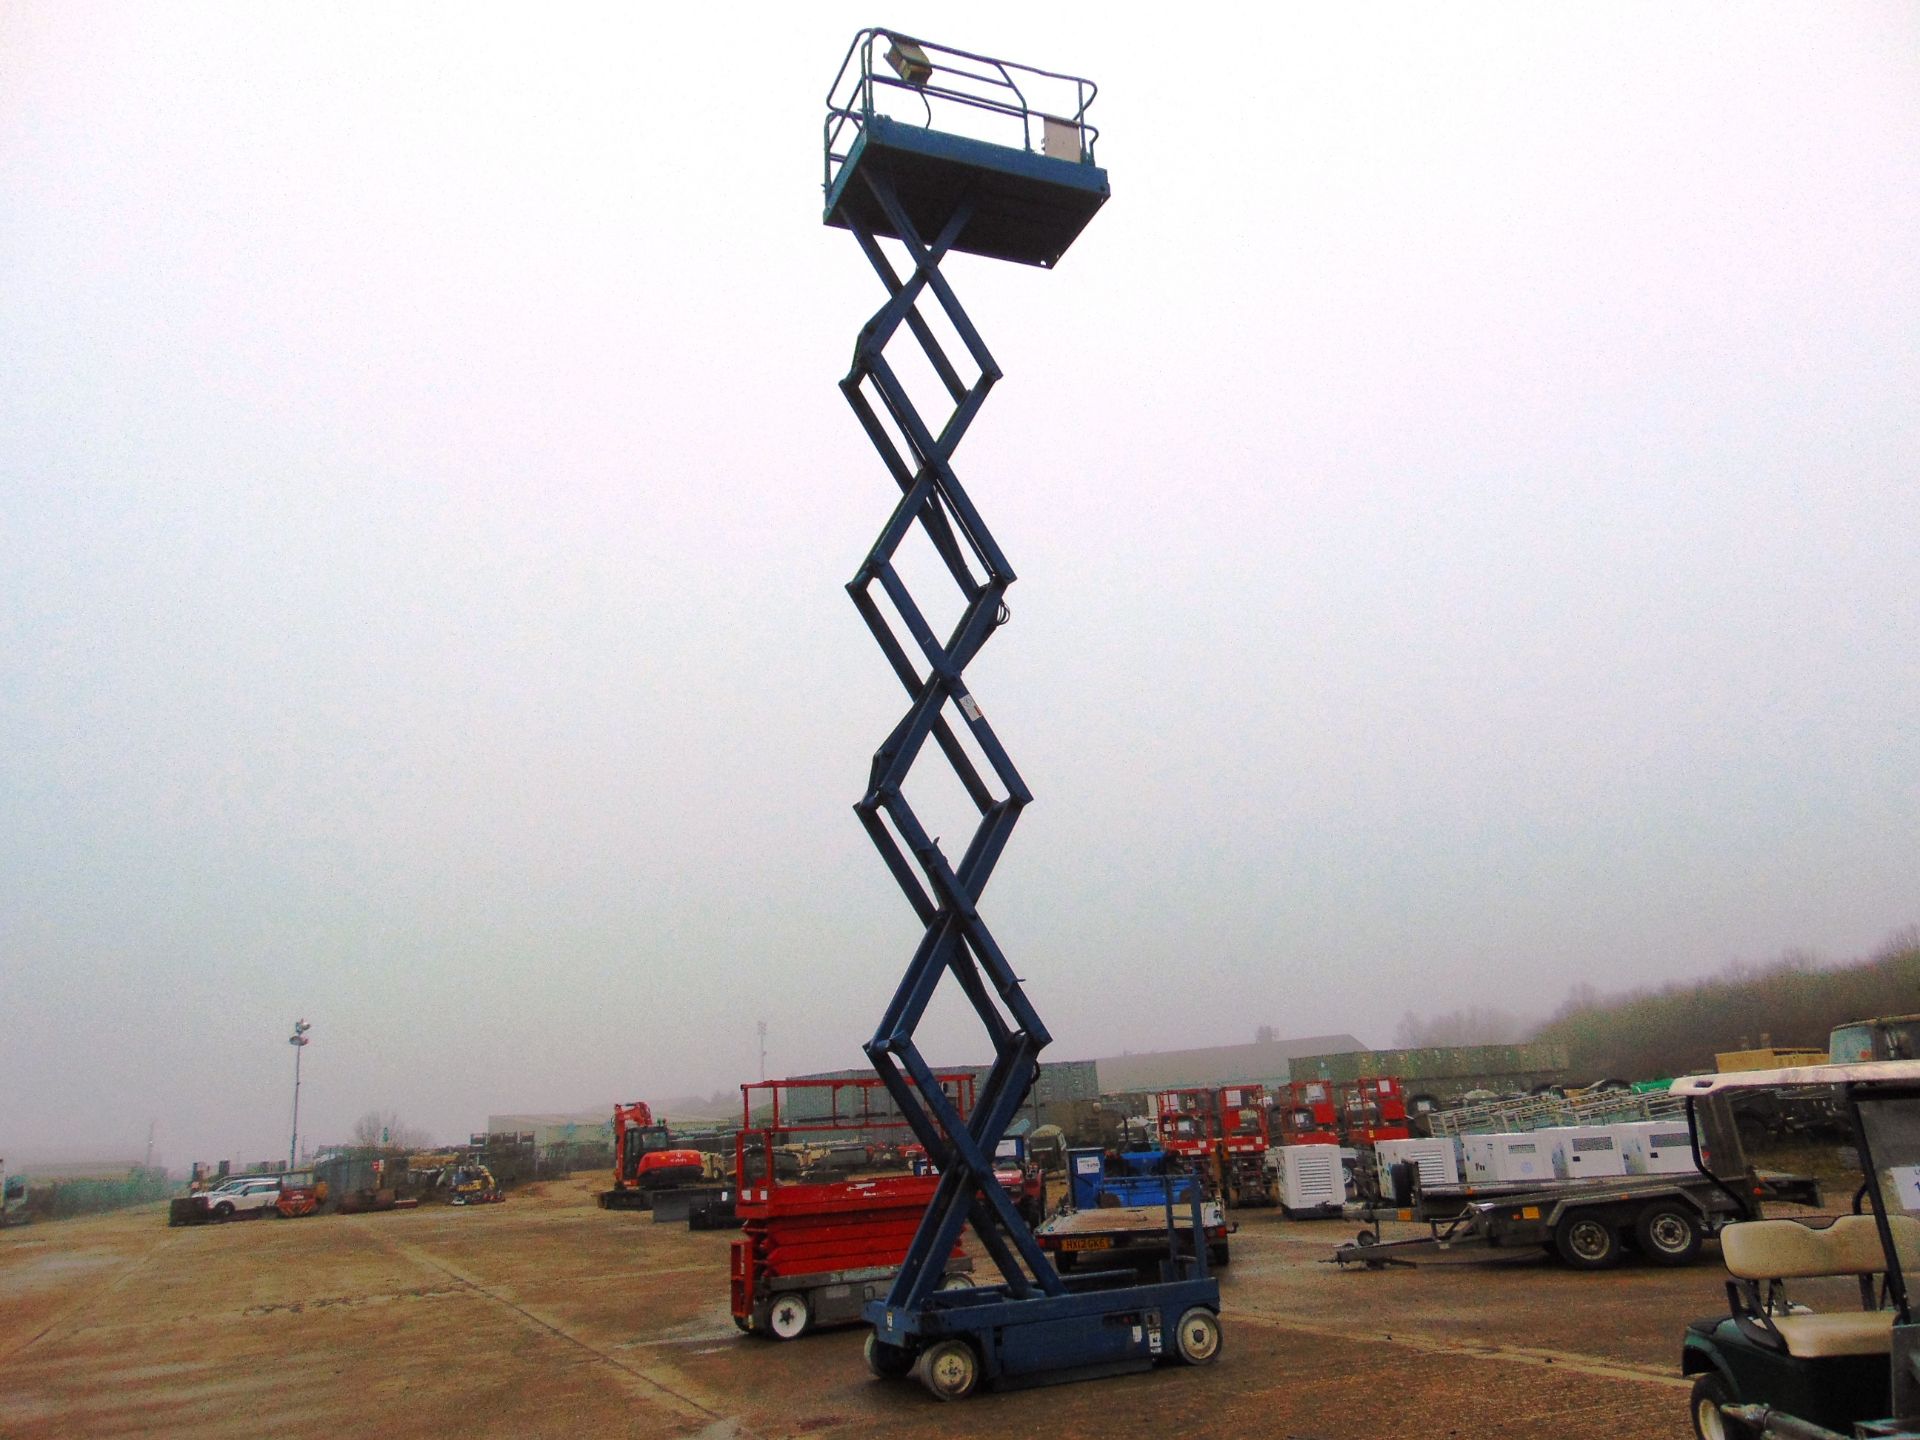 Powered Access Upright X32 11.8m Electric Scissor Lift ONLY 1,326 HOURS! - Image 2 of 18